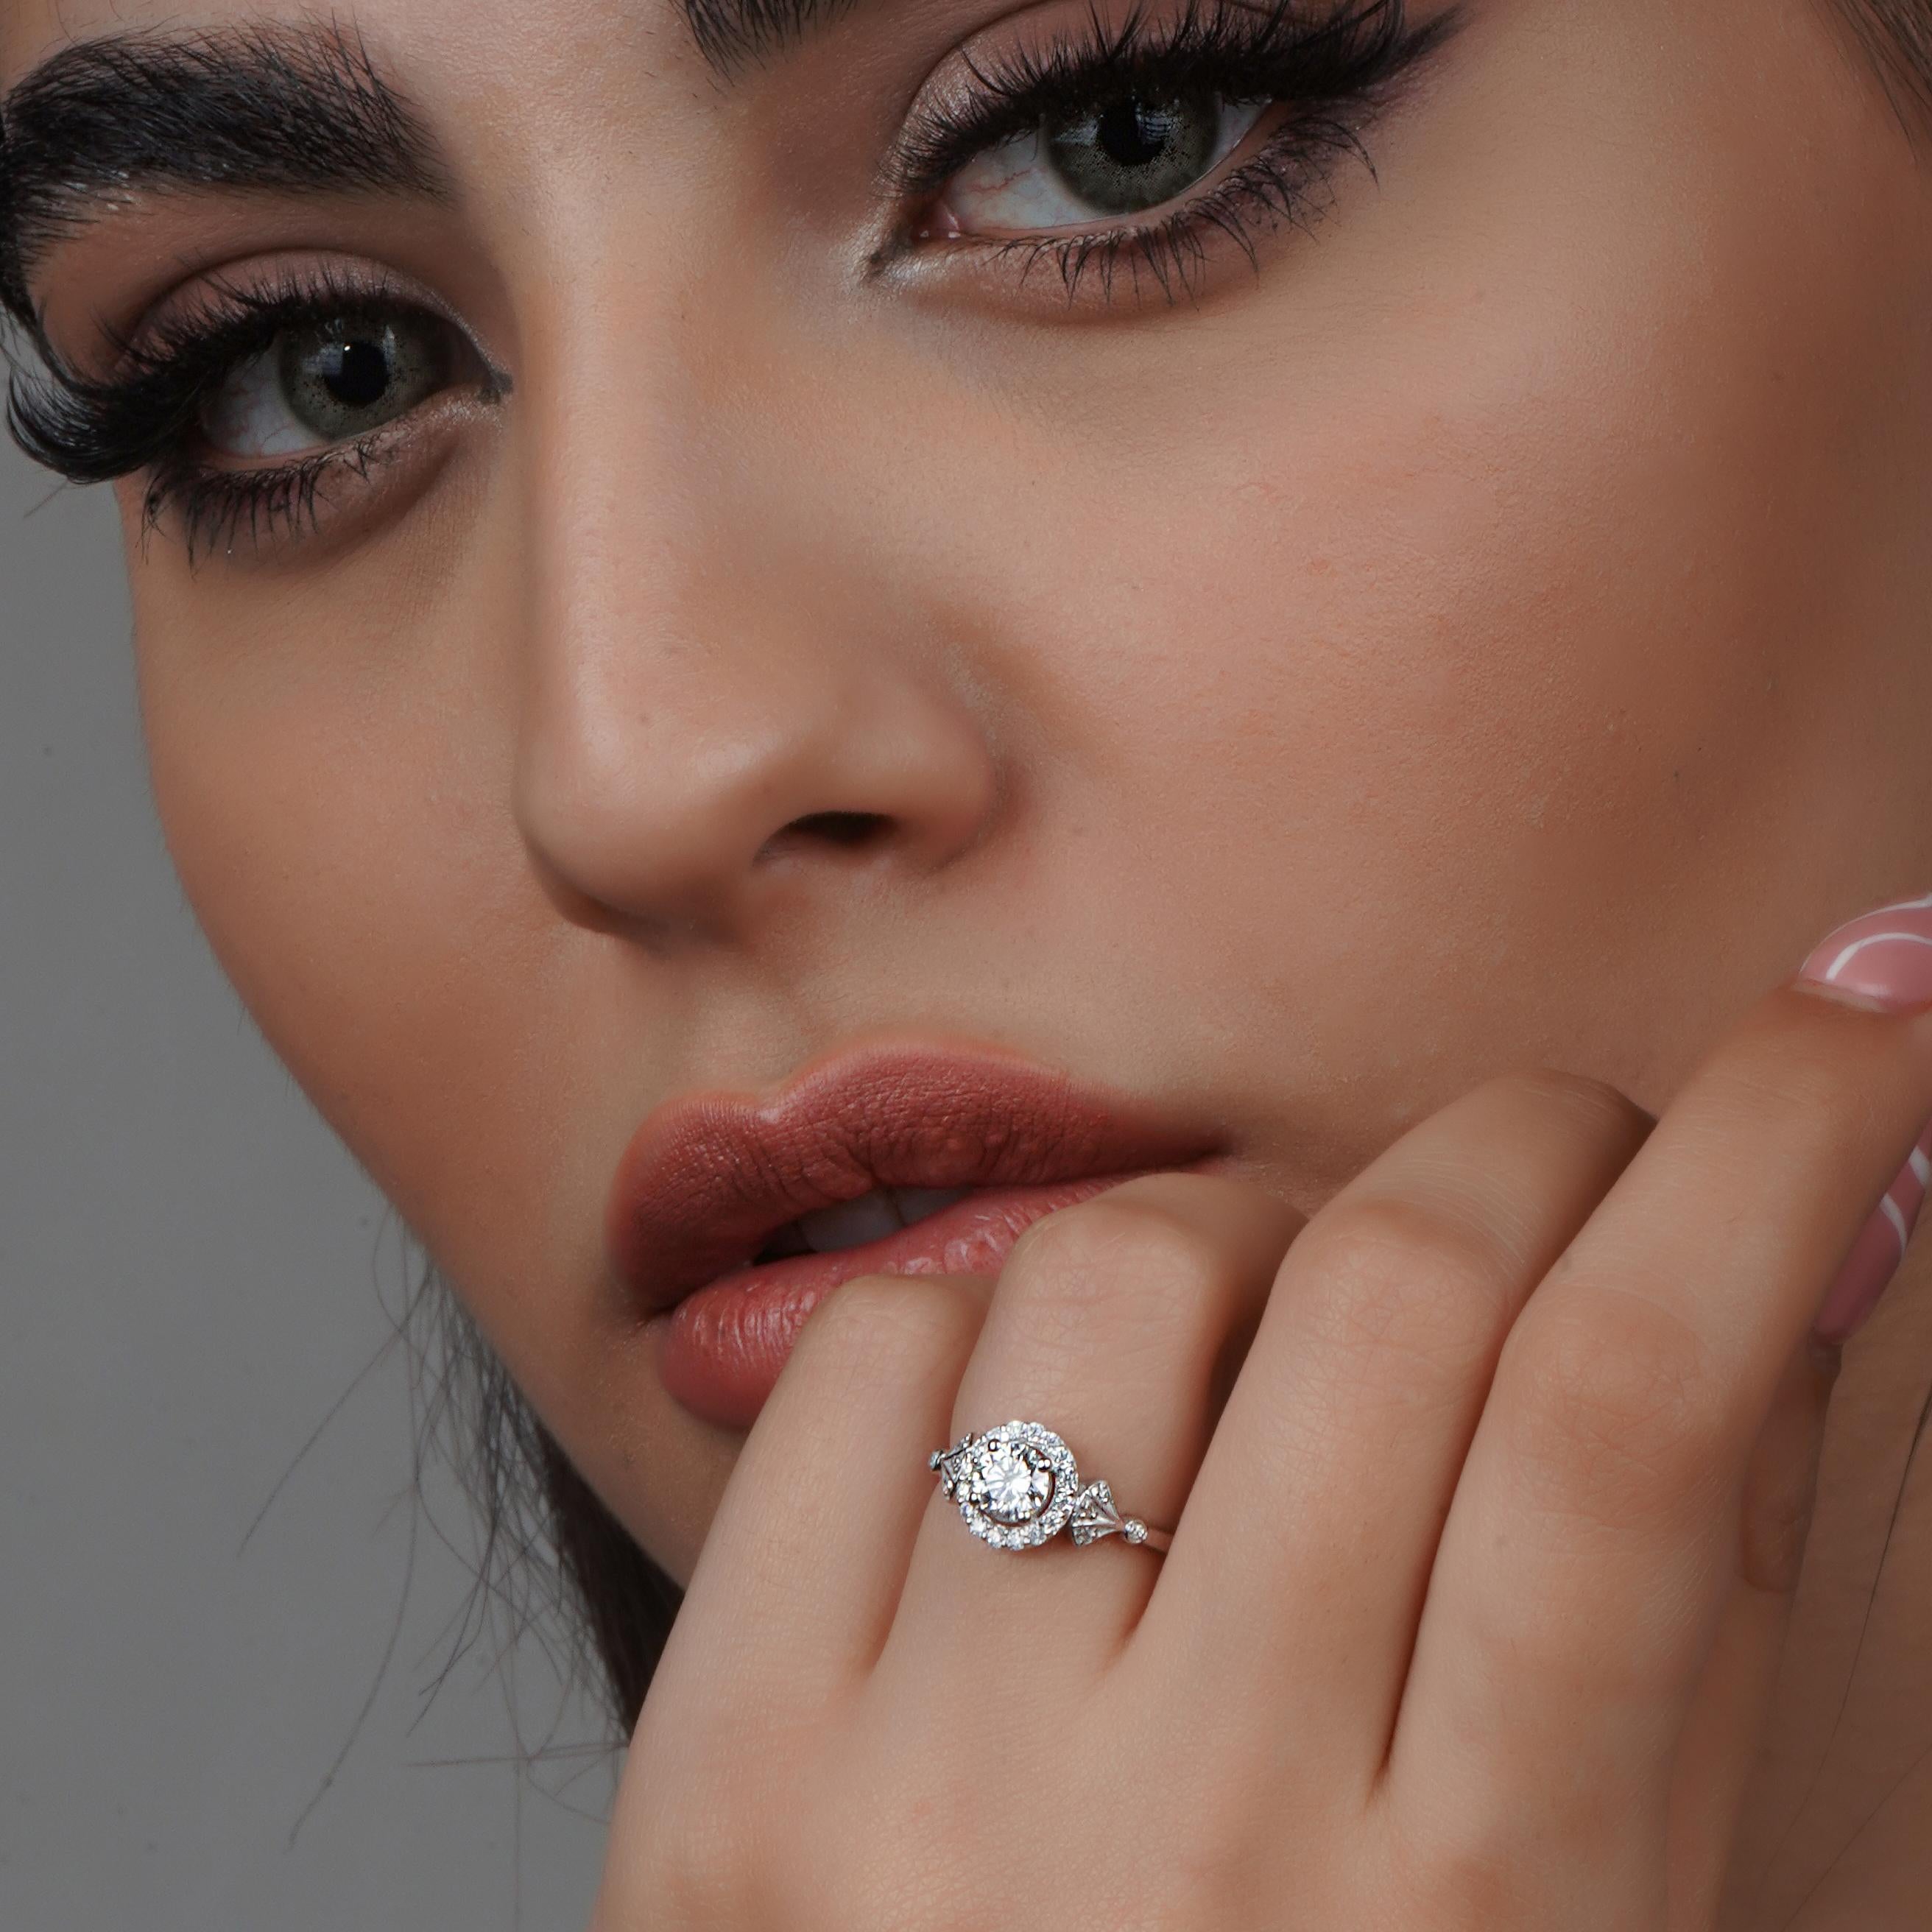 PRODUCT DETAILS:
18k Solid Gold
Stones:
Center Stone: Brilliant cut Moissanite 0.44 c.t (approx)
Side stones :Brilliant cut Moissanite 0.21 c.t (approx)
Made entirely by hand using ethically sourced stones and reclaimed metals that have been melted